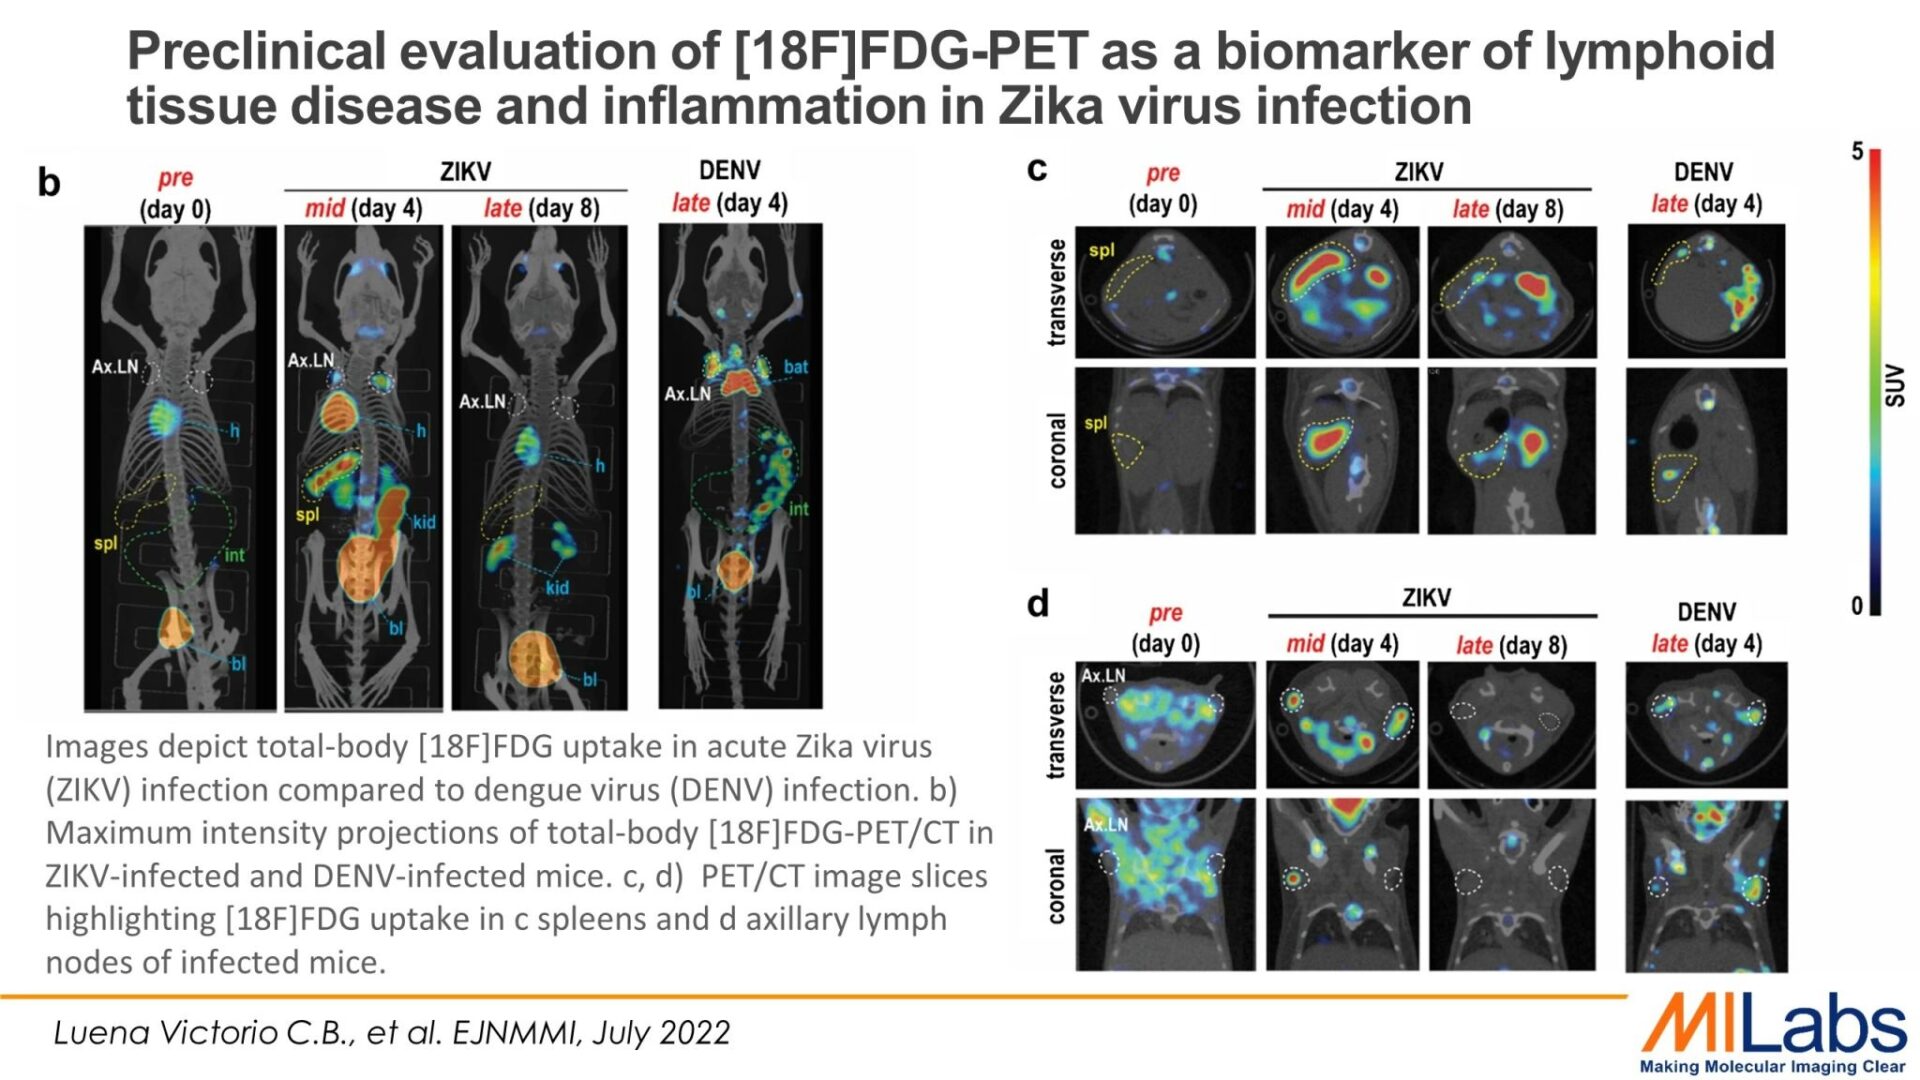 Preclinical evaluation of [18F]FDG-PET as a biomarker of lymphoid tissue disease and inflammation in Zika virus infection microPET